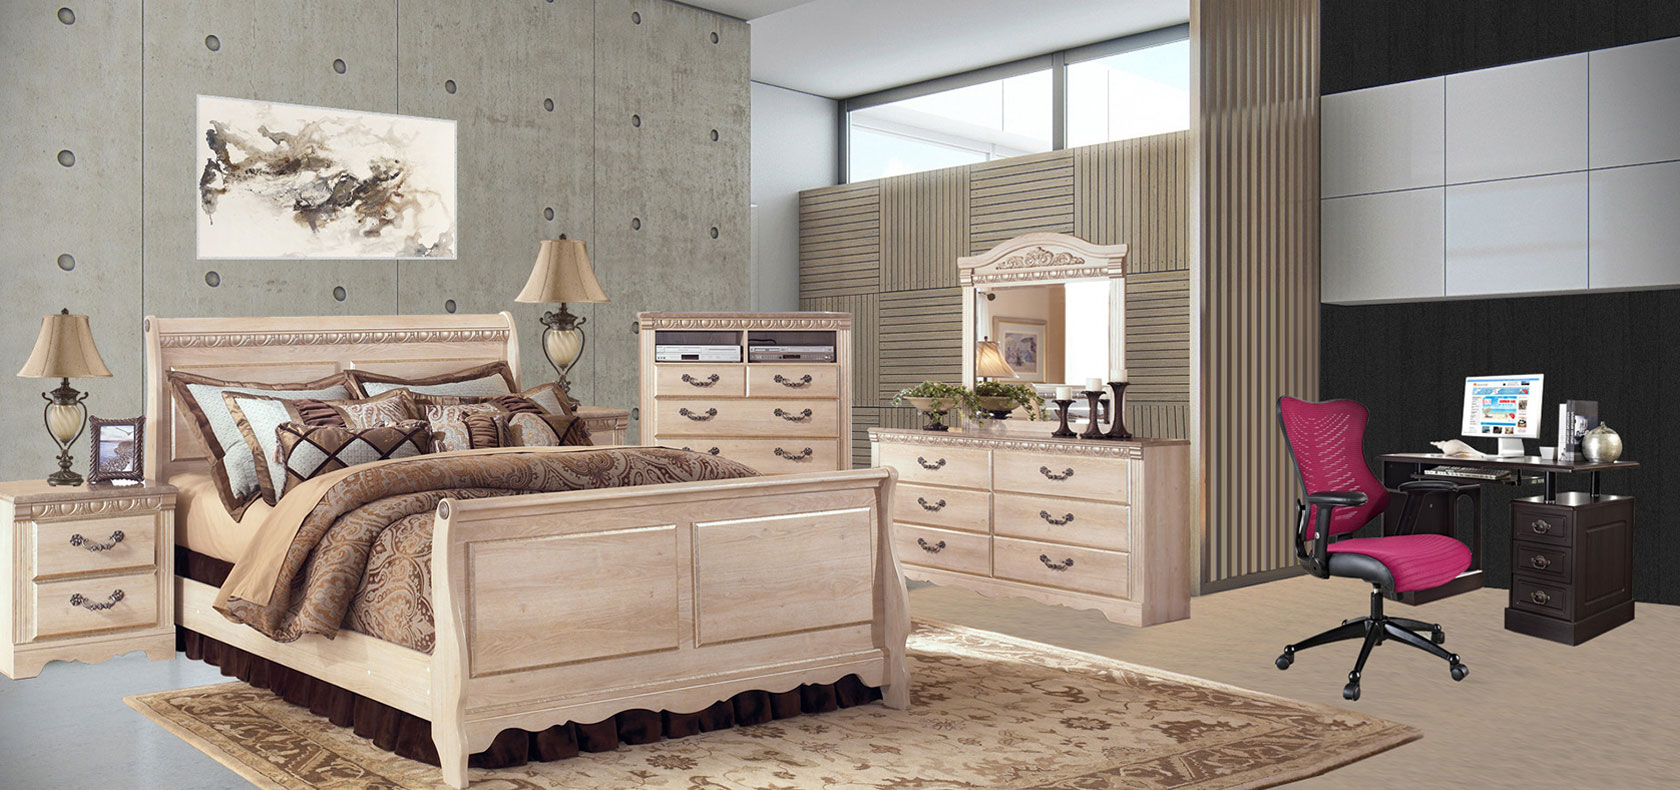 Bedroom Furniture For Couples